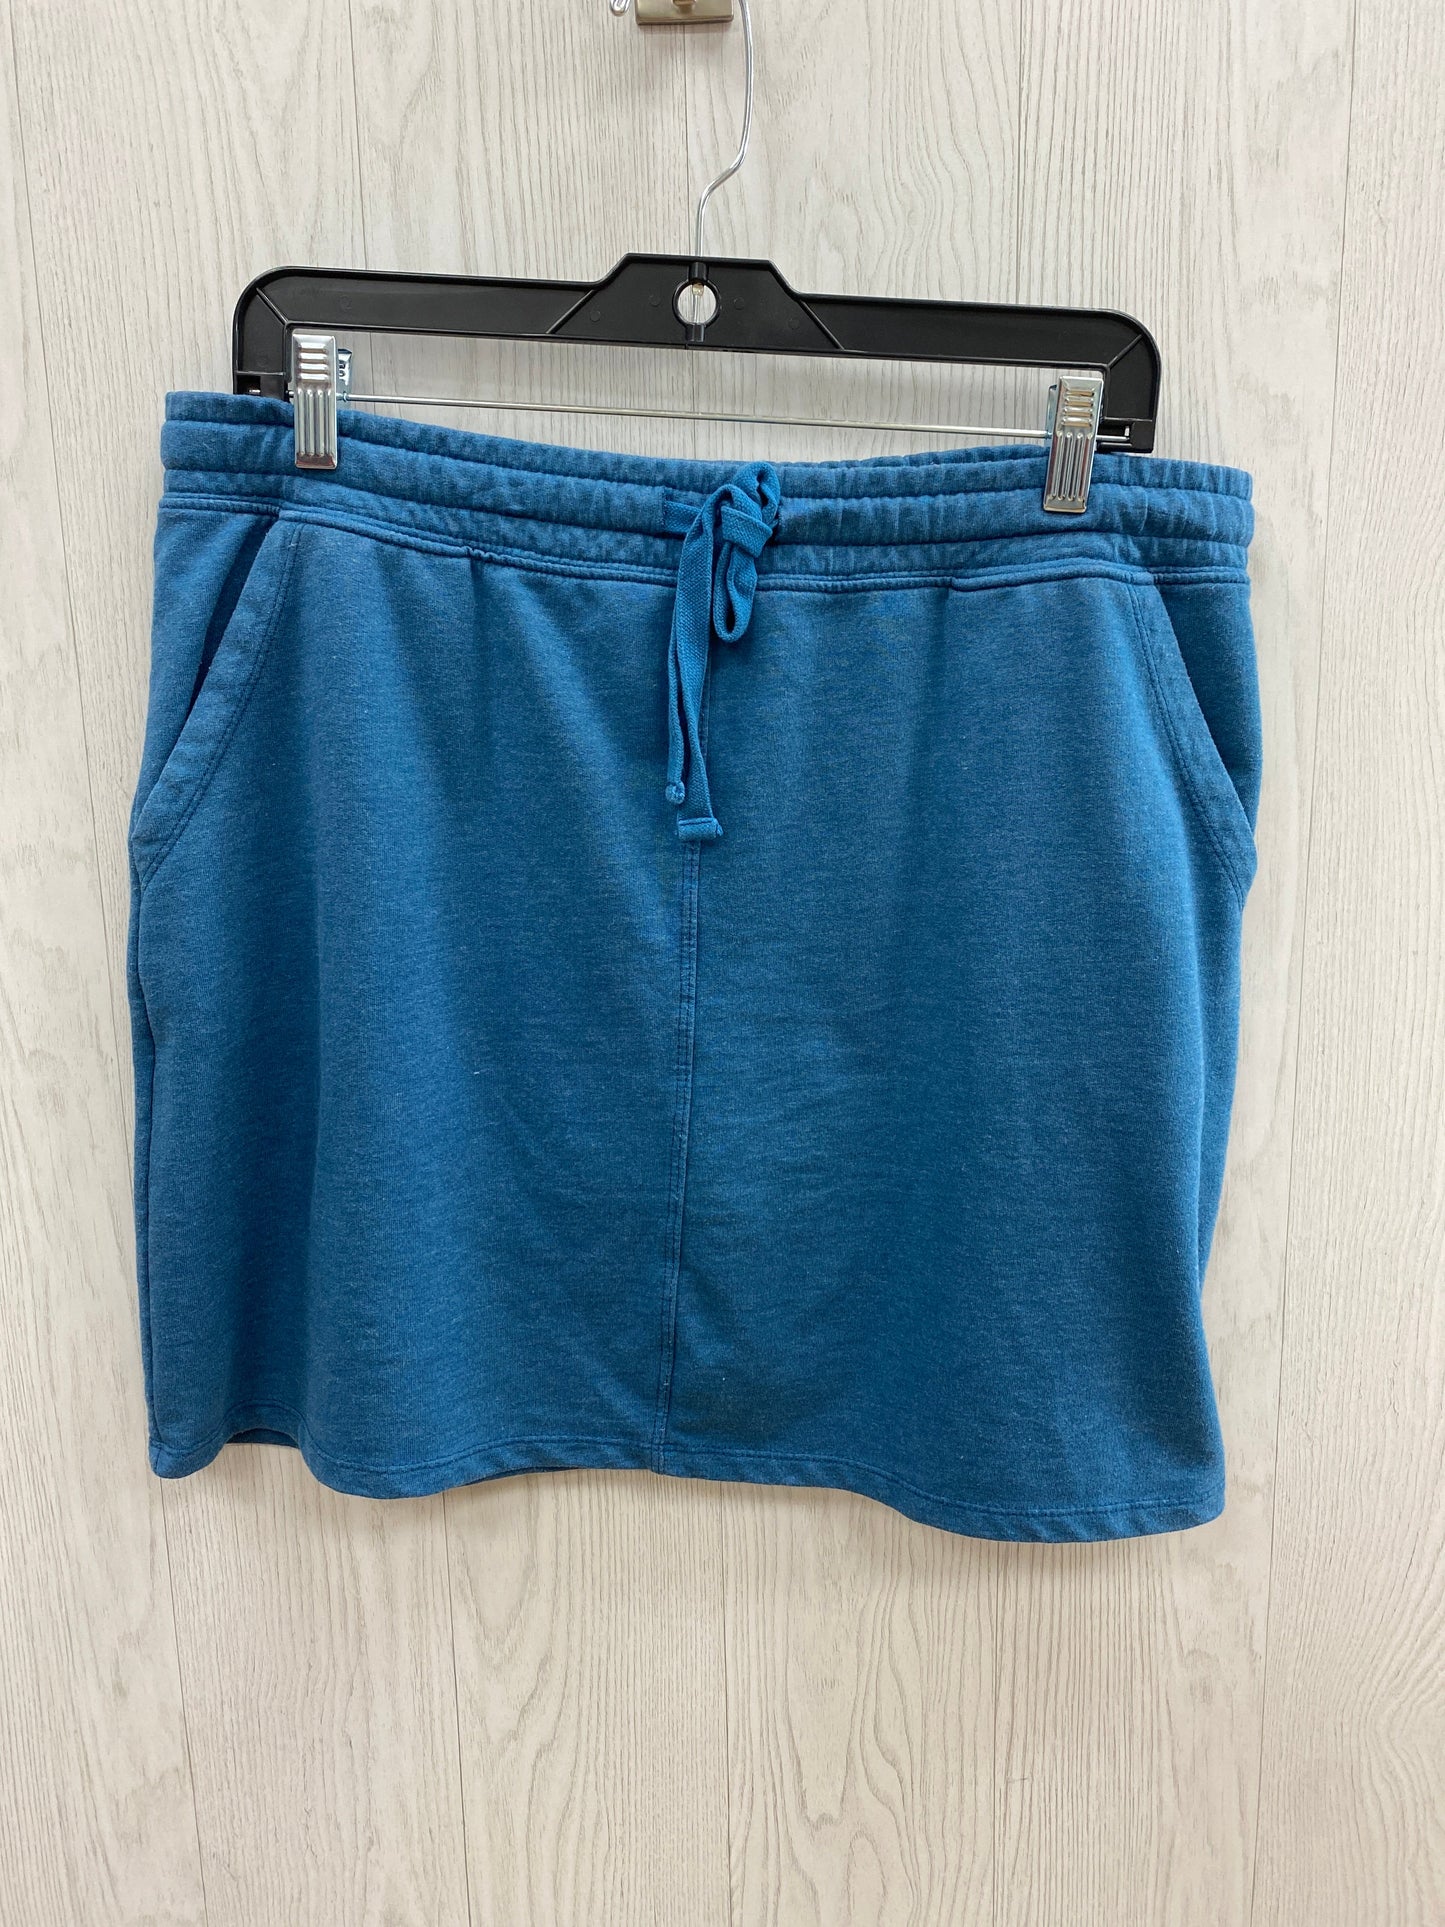 Blue Athletic Shorts Members Mark, Size L